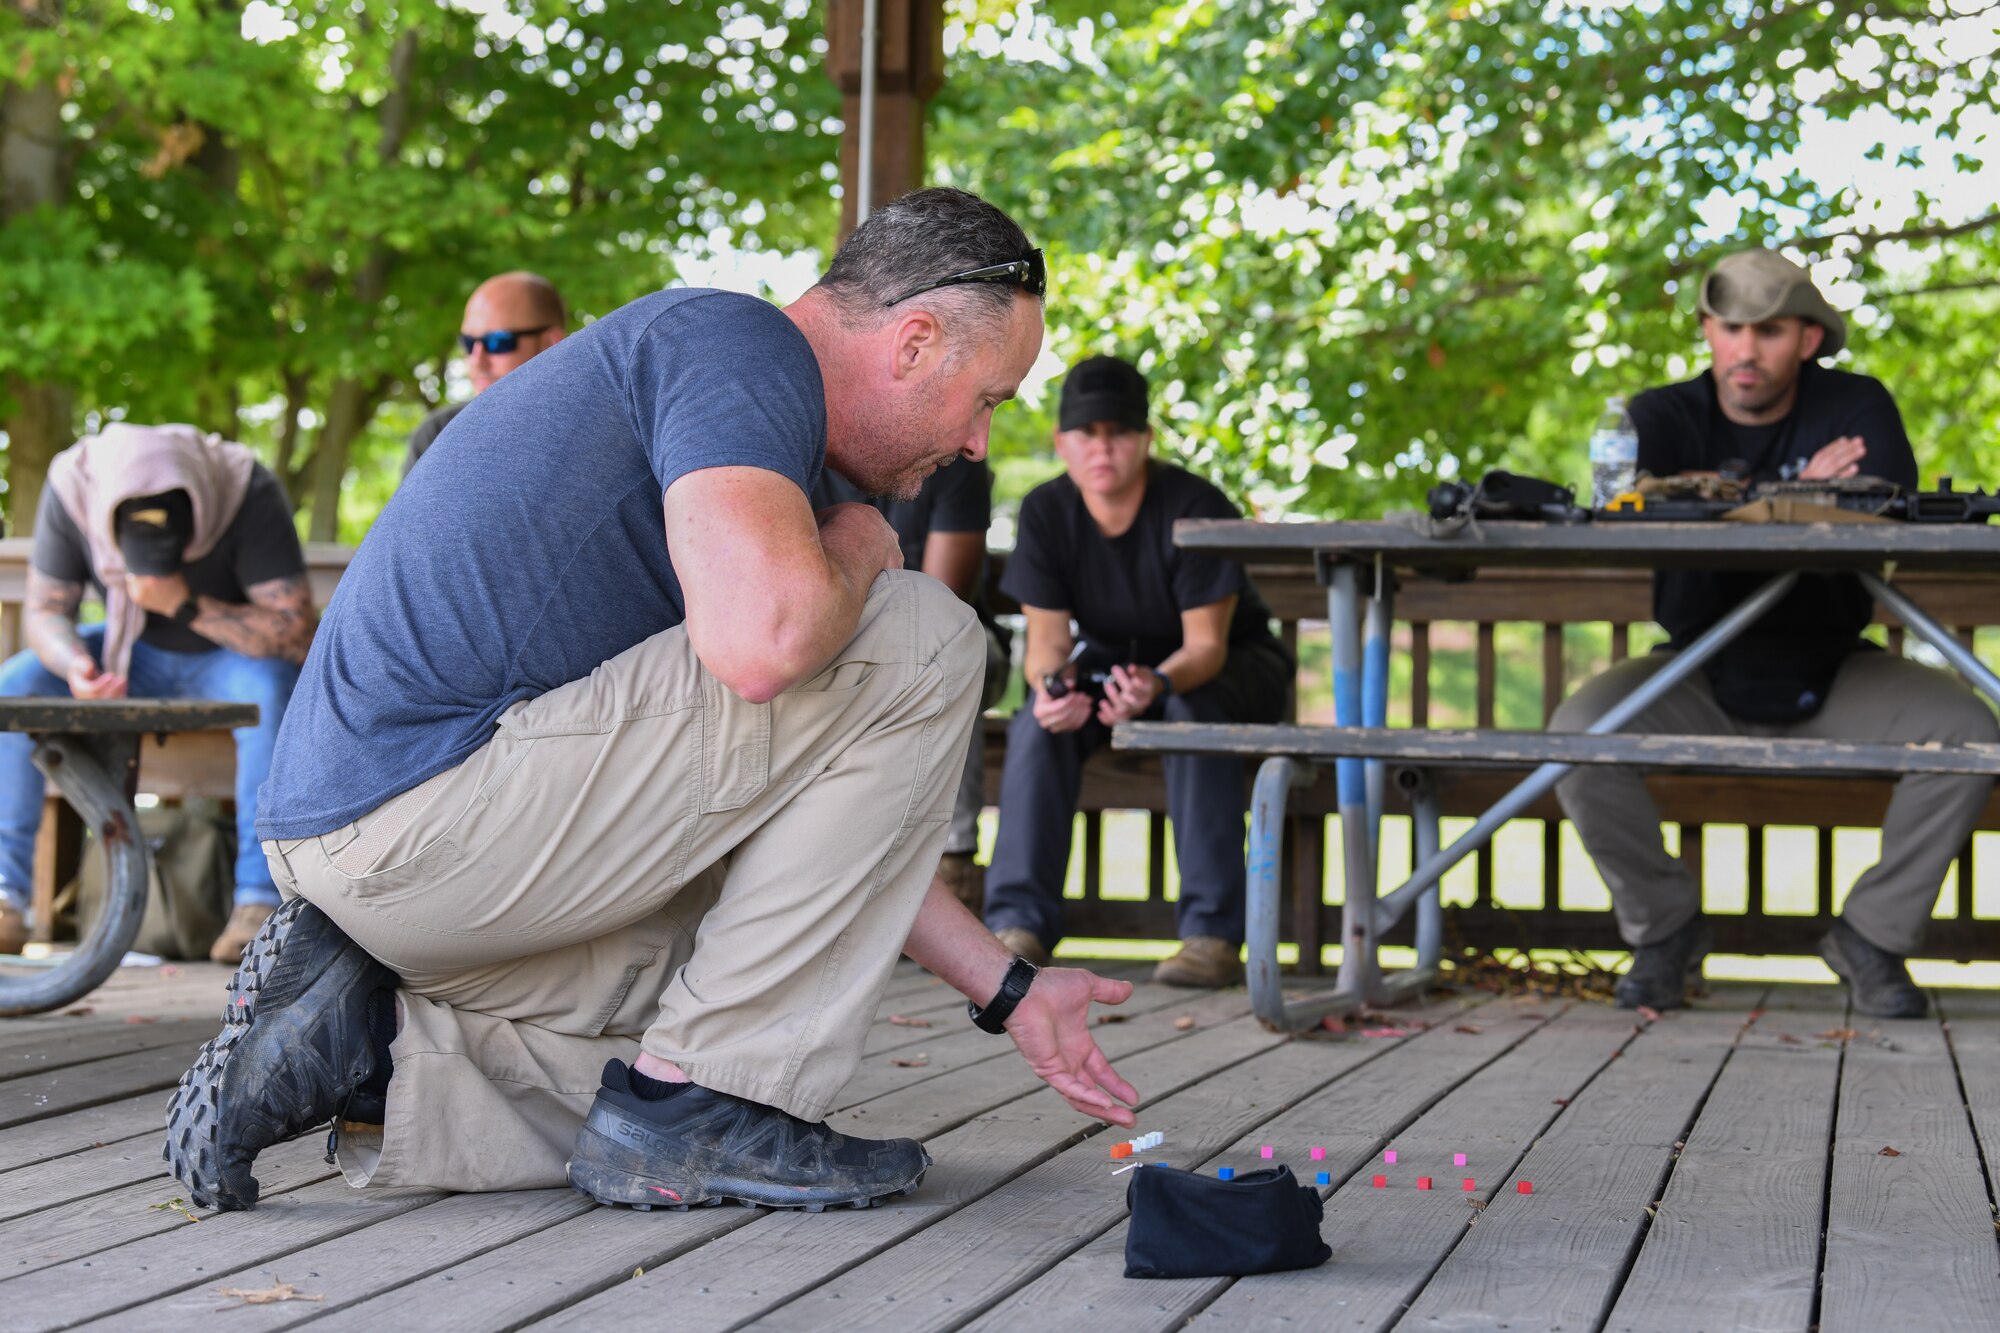 Master Sgt. Jeremy Bryner, an Integrated Defense Leadership Course Instructor assigned to the 910th Security Forces Squadron, teaches a lead tactical squad movement course, July 25, 2022, at Youngstown Air Reserve Station, Ohio.